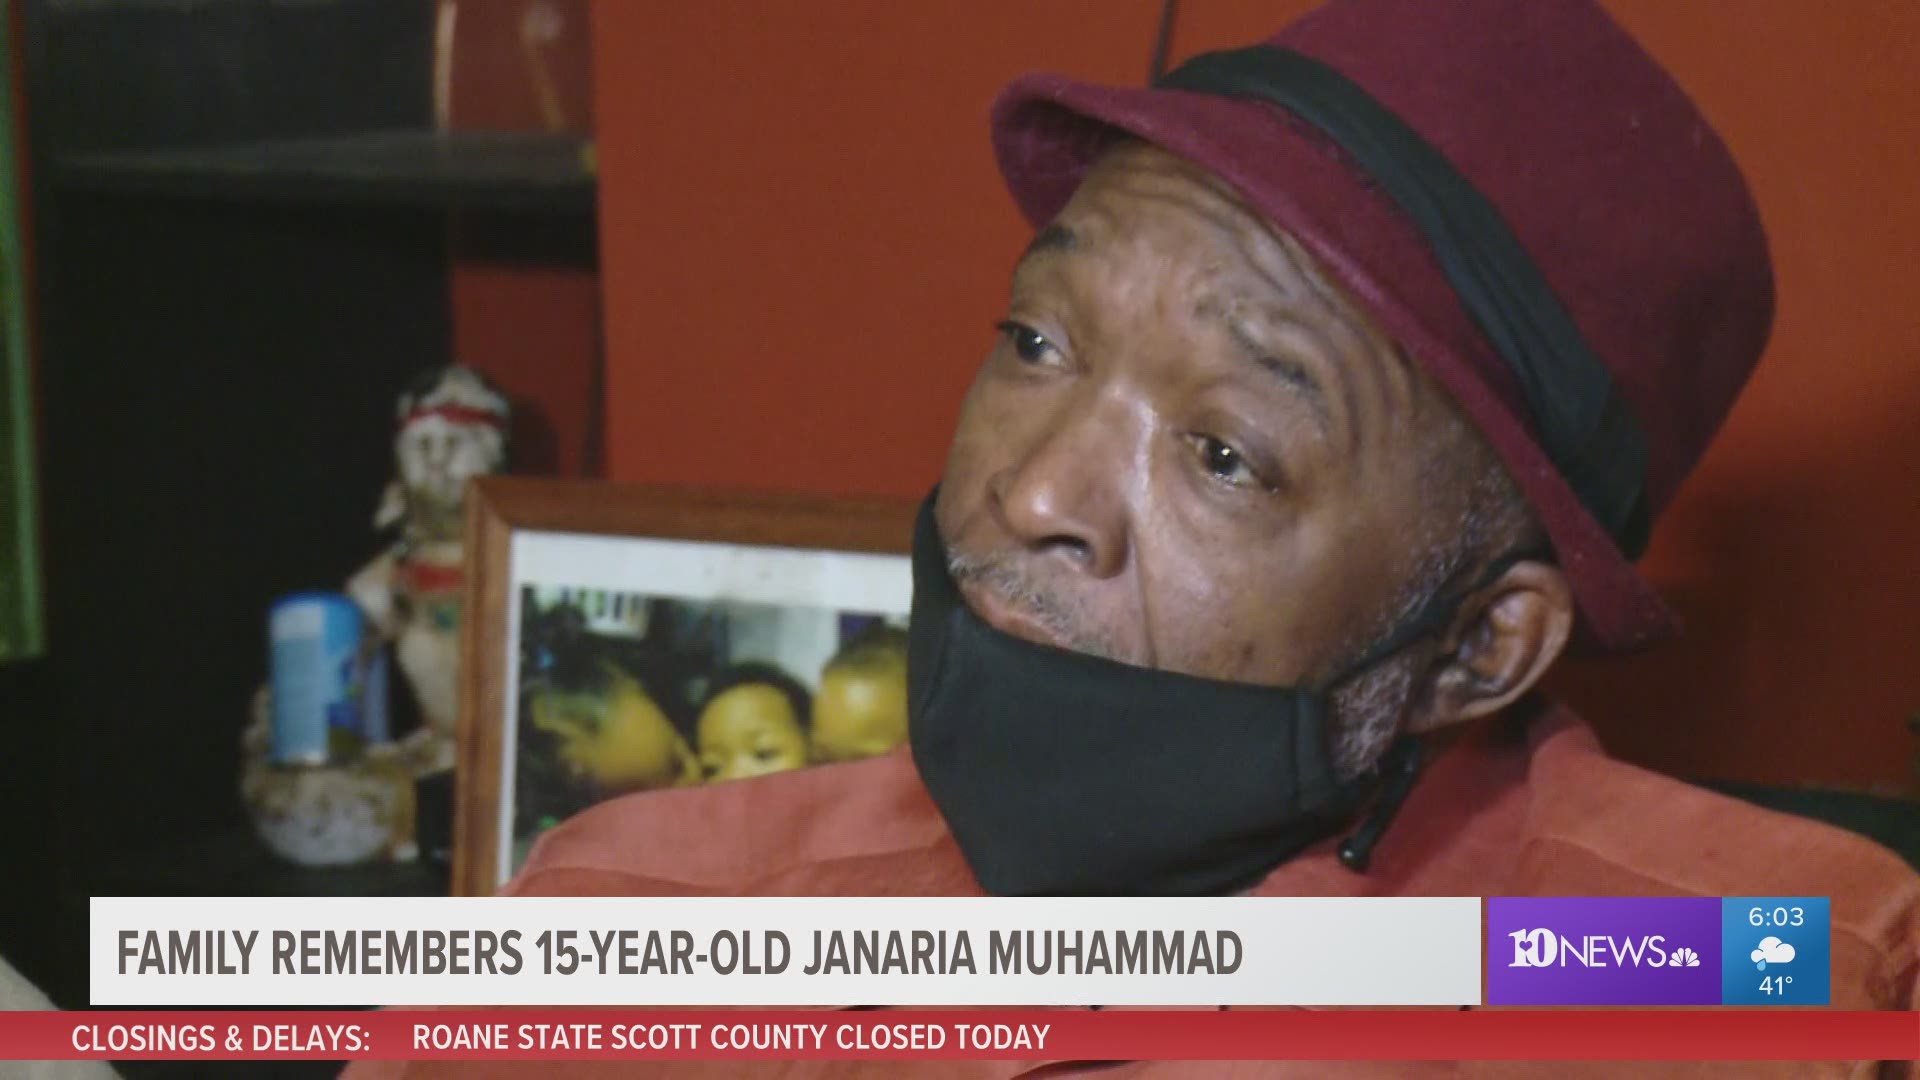 The father of Janaria Muhammad describes what he felt after his daughter was killed due to gun violence.